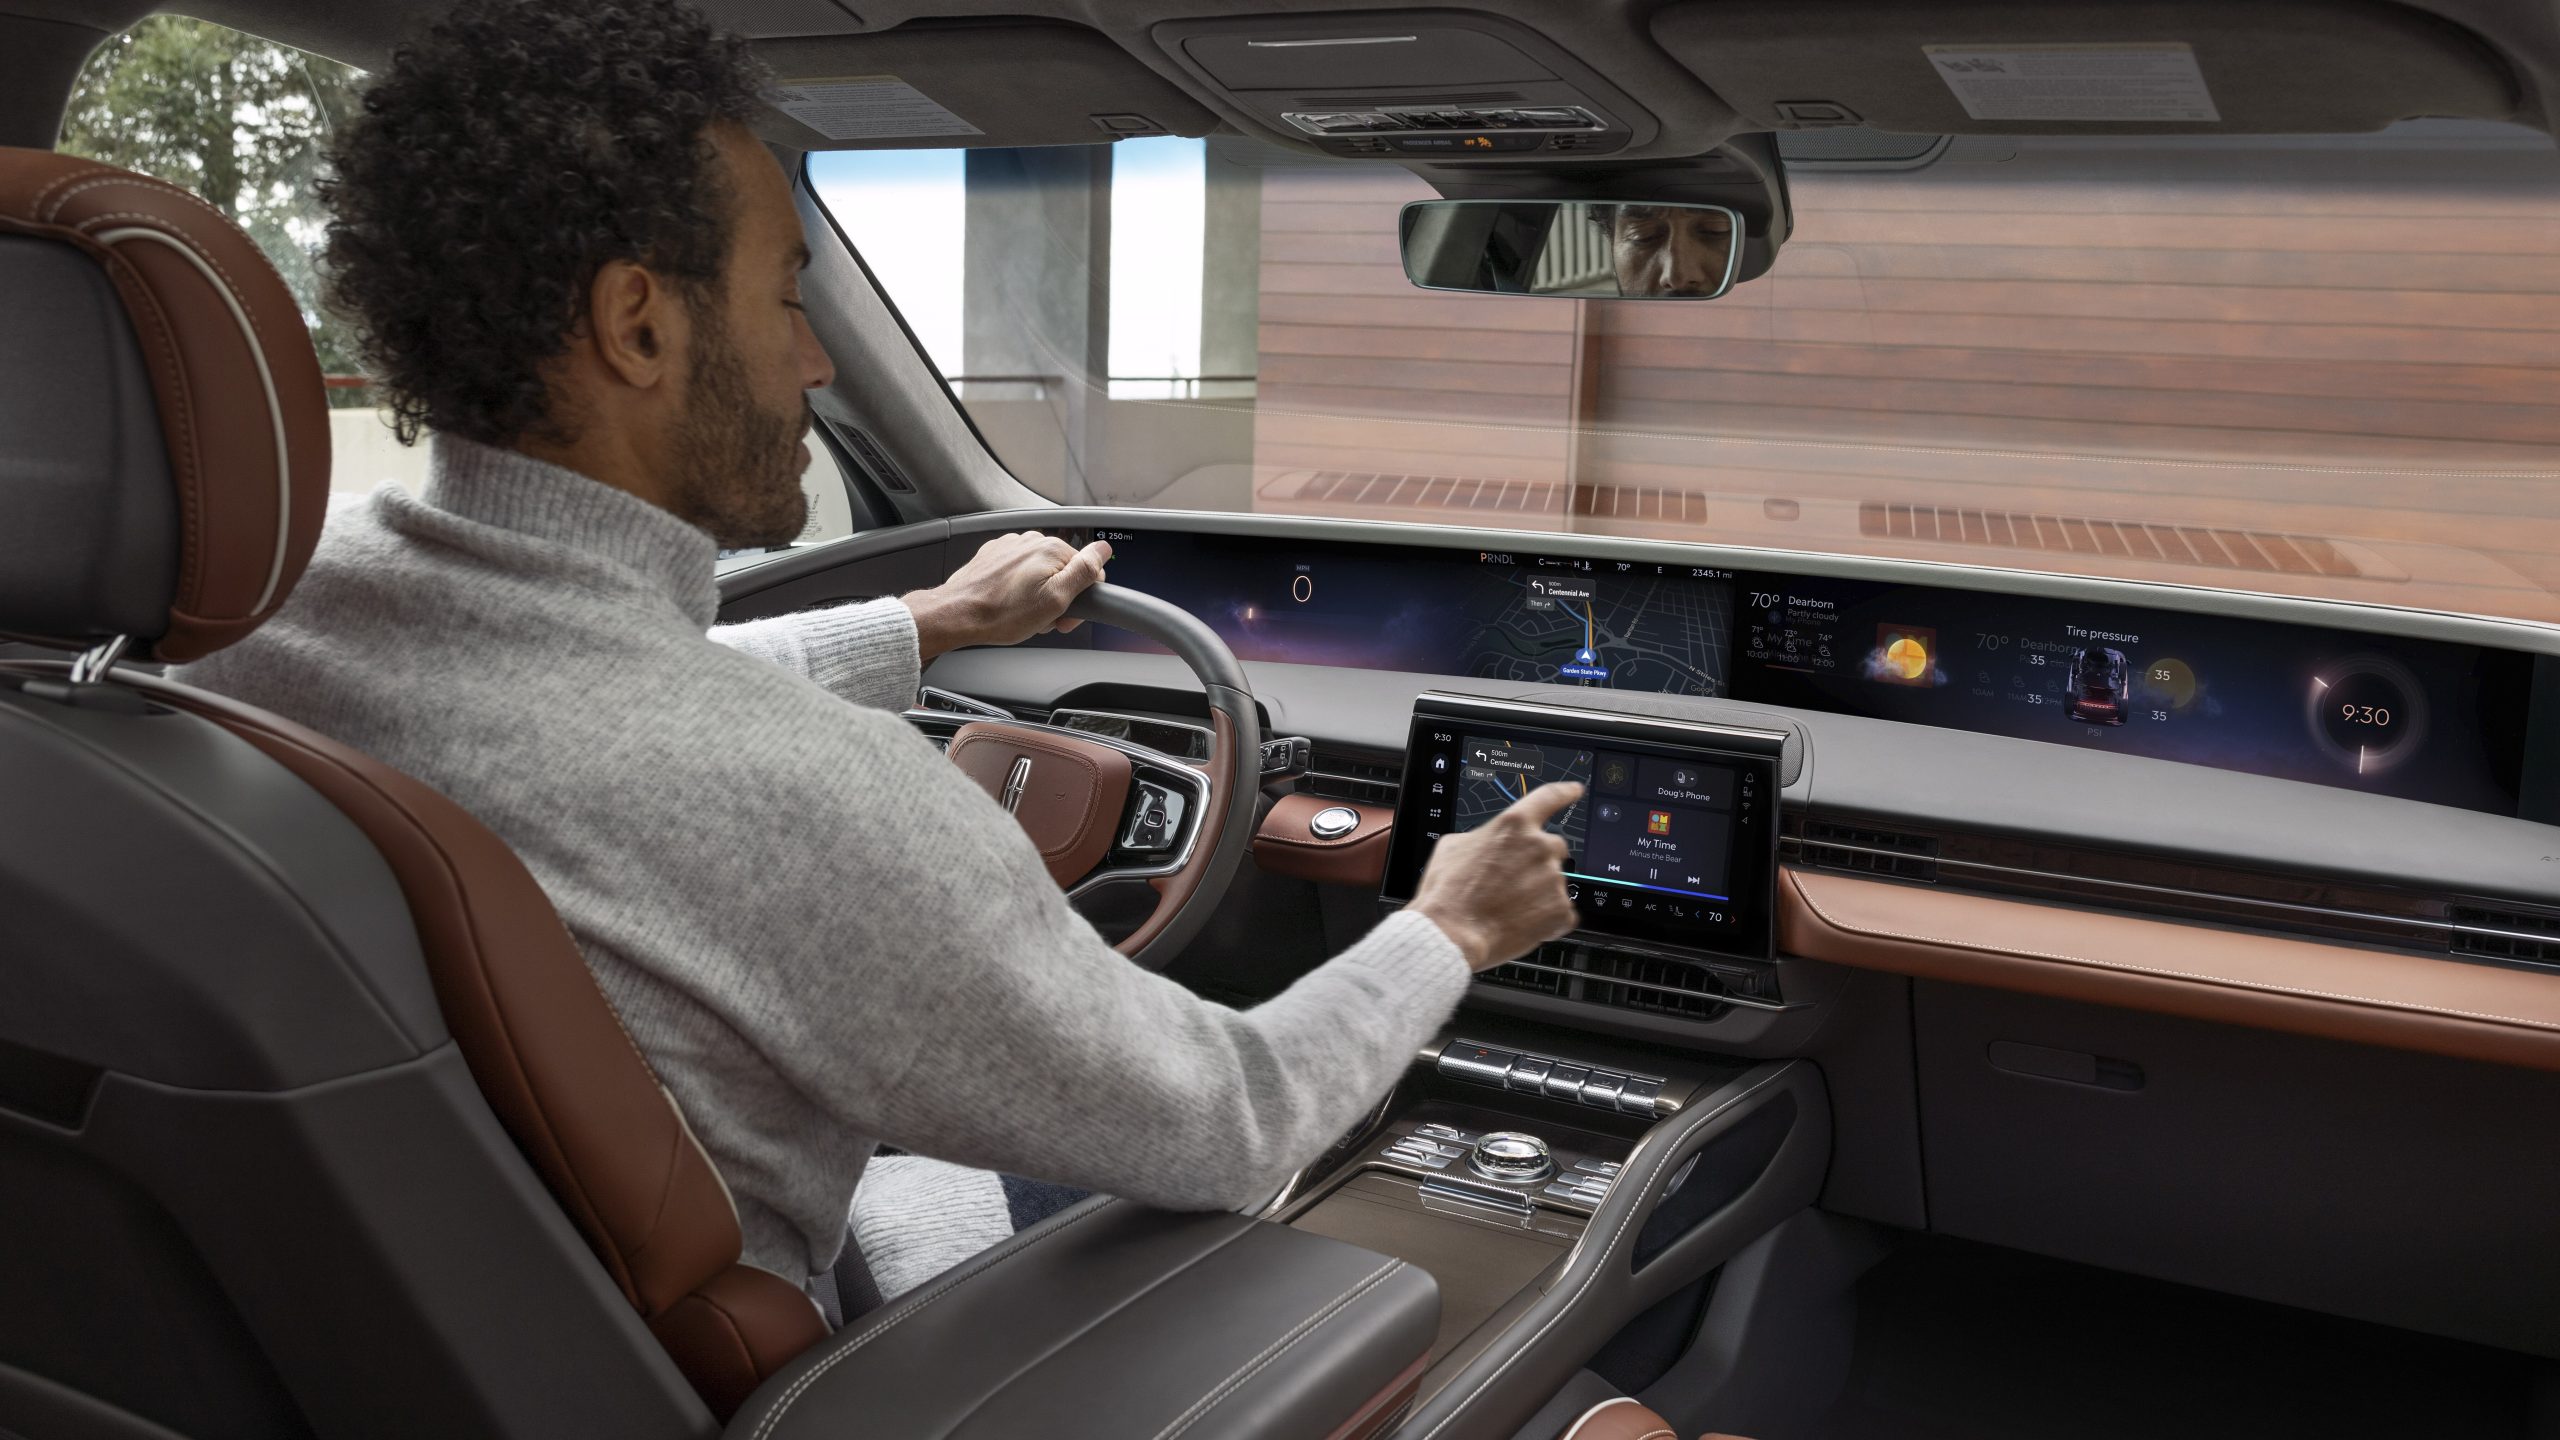 Is Ford Intercepting Your Connected Vehicle's Data?